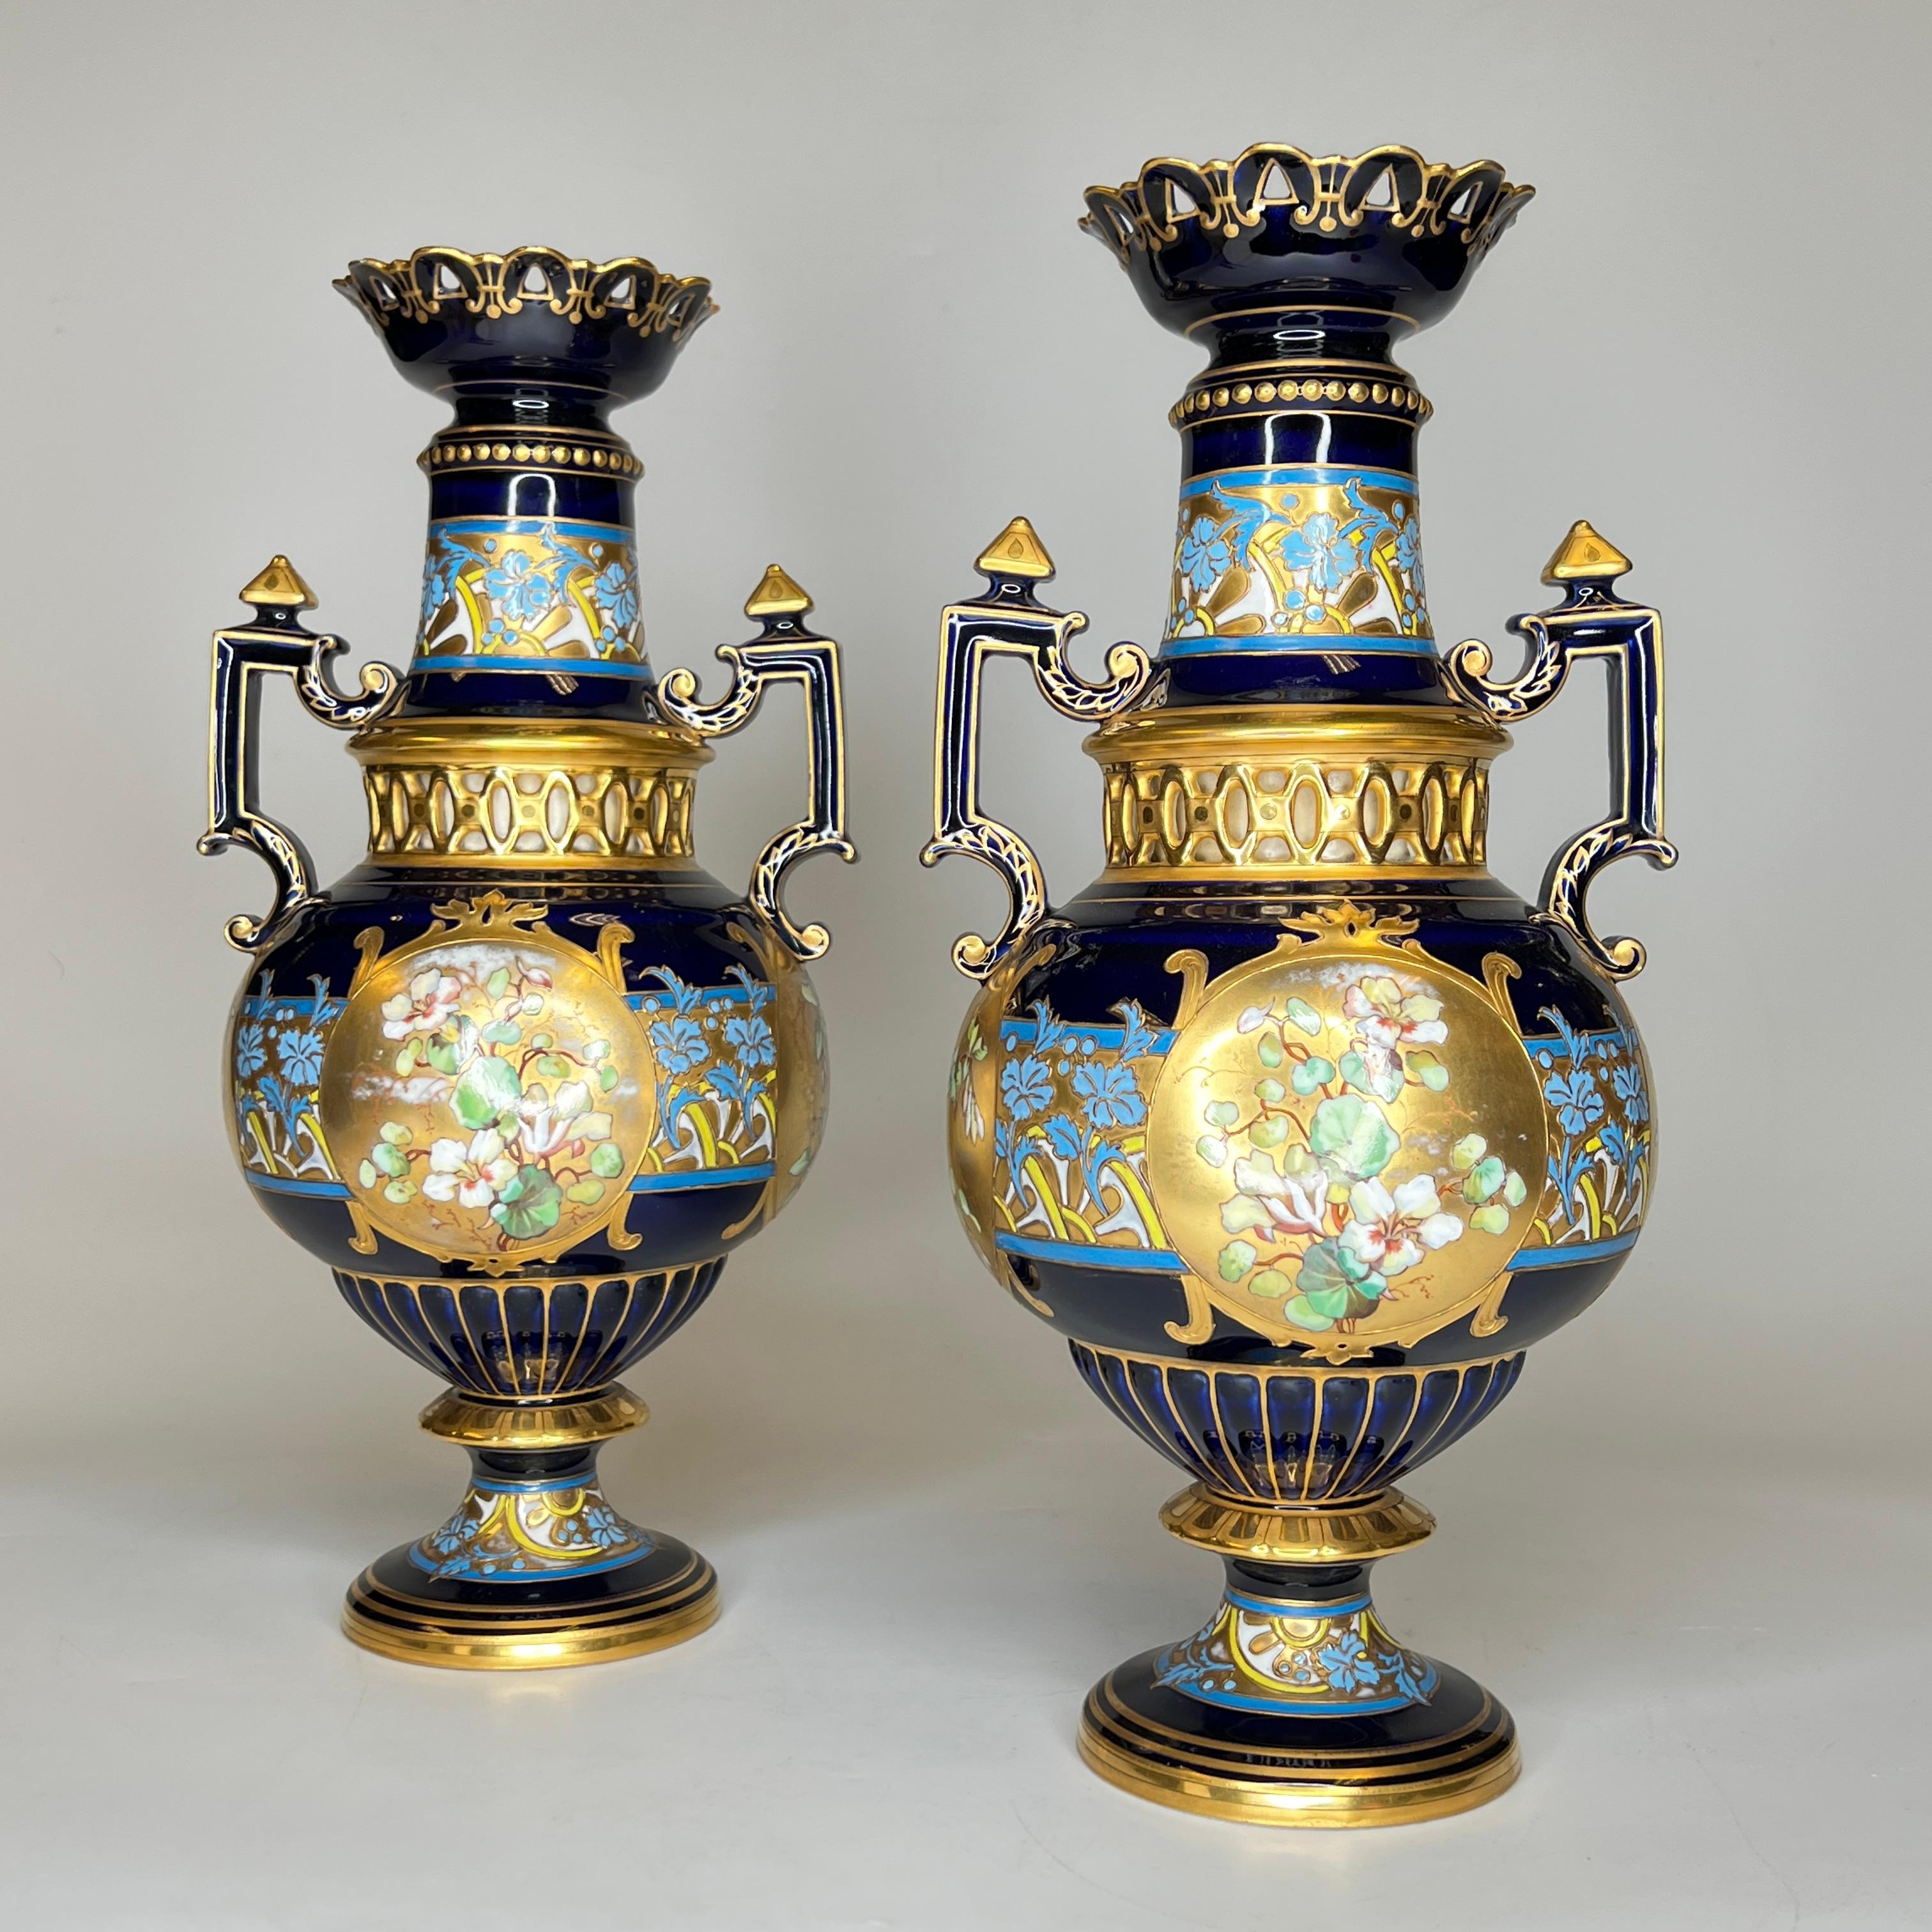 Gilt Pair Antique Czech Floral Painted and Gilded Porcelain Vases by Fischer and Mieg For Sale